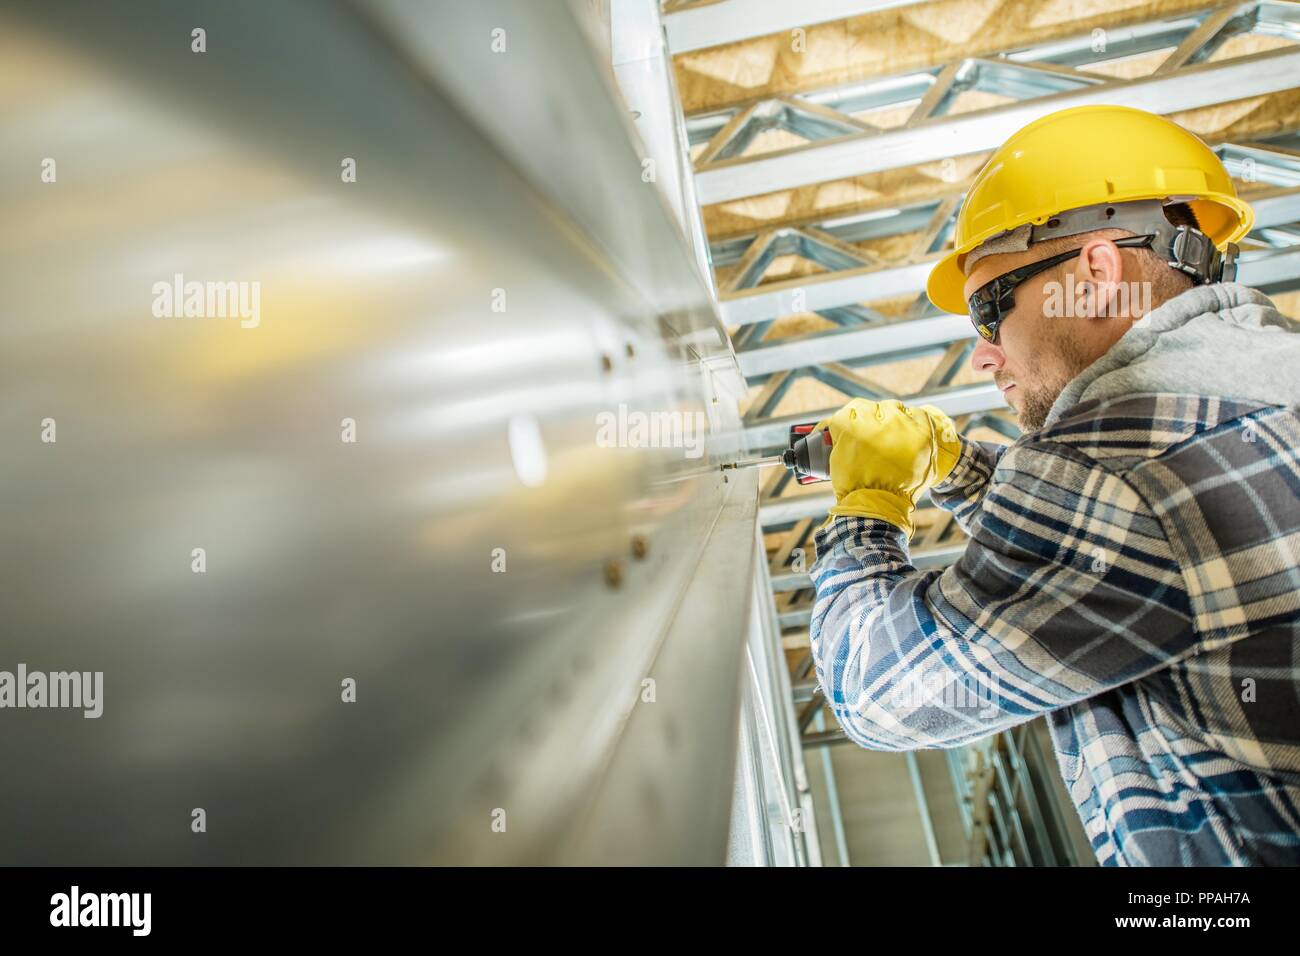 Building Steel Frame Contractor Worker Closeup Photo. Caucasian Men with Drill Driver Connecting Steel Elements of the Frame. Stock Photo